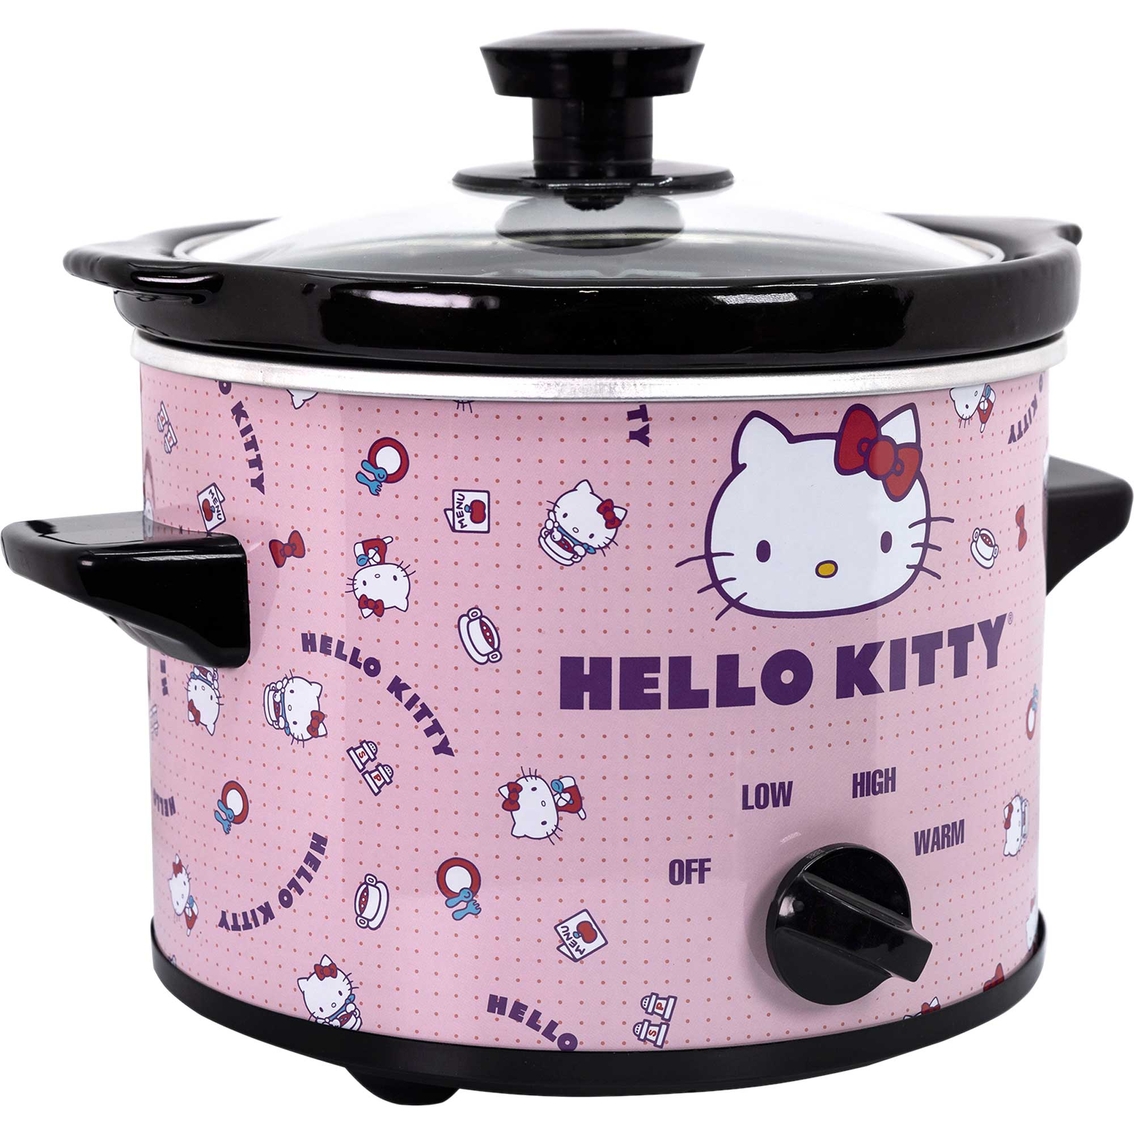 Hello Kitty 2 Quart Slow Cooker - Image 3 of 5